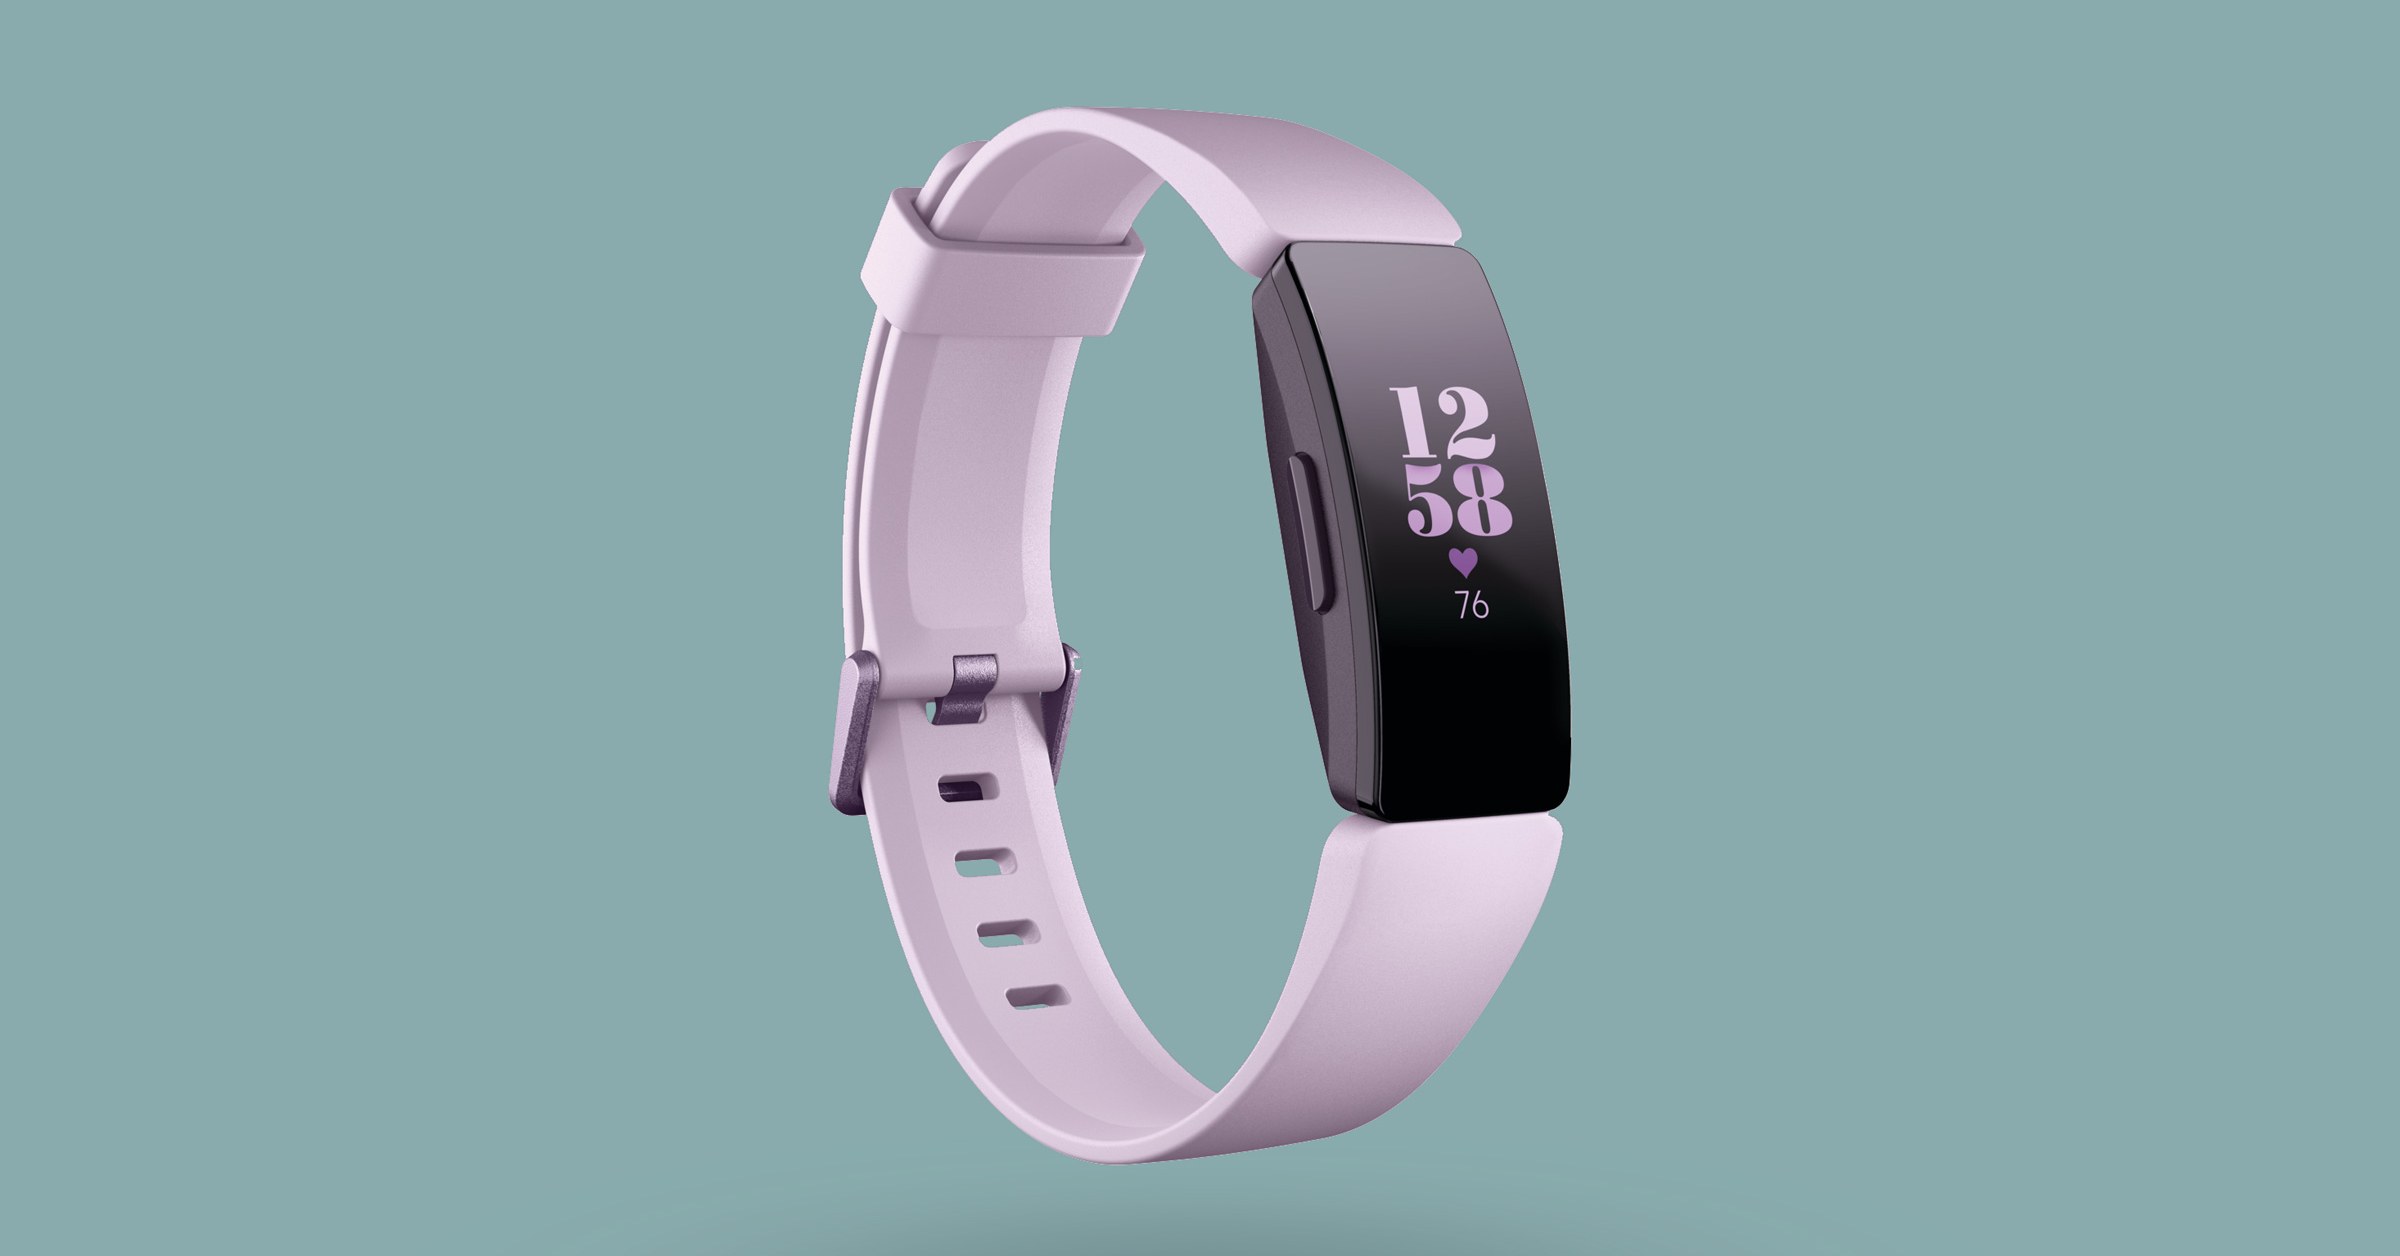 live healthy sg fitbit